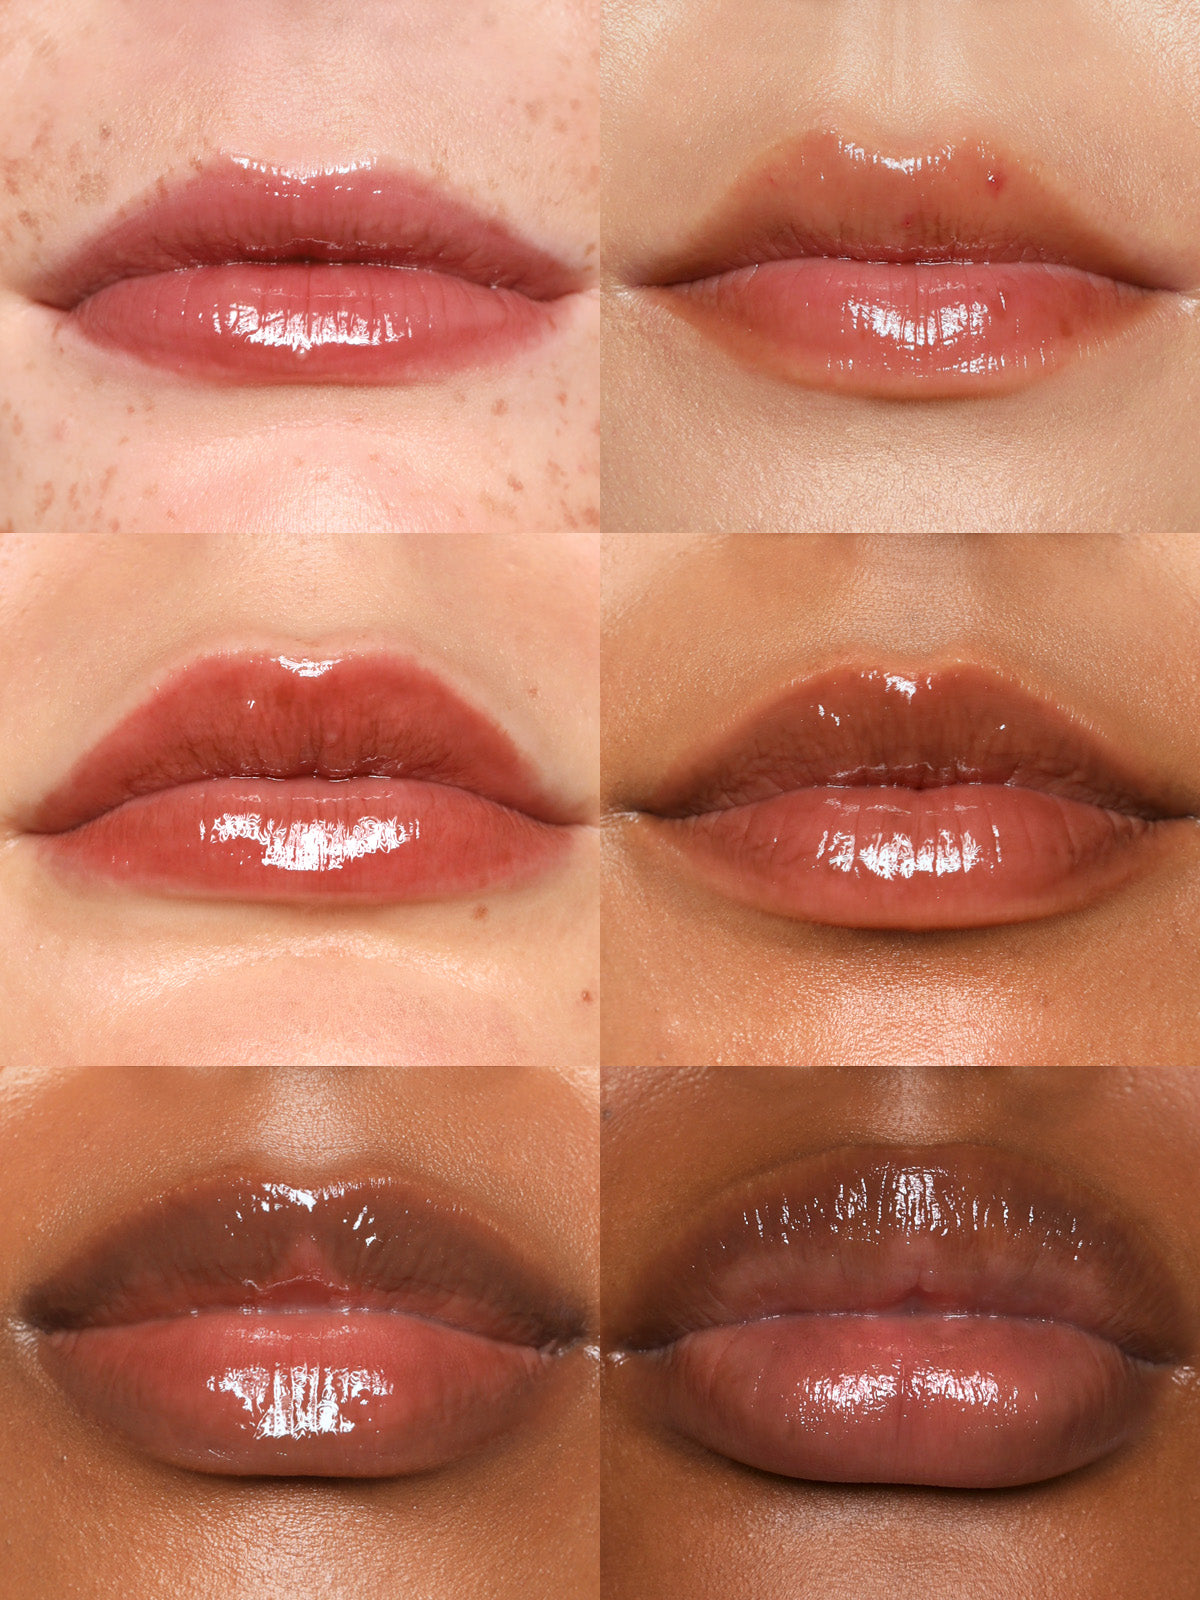 GRID OF REFY LIP GLOSS IN SHADE SEPIA ON DIFFERENT SKIN TONES